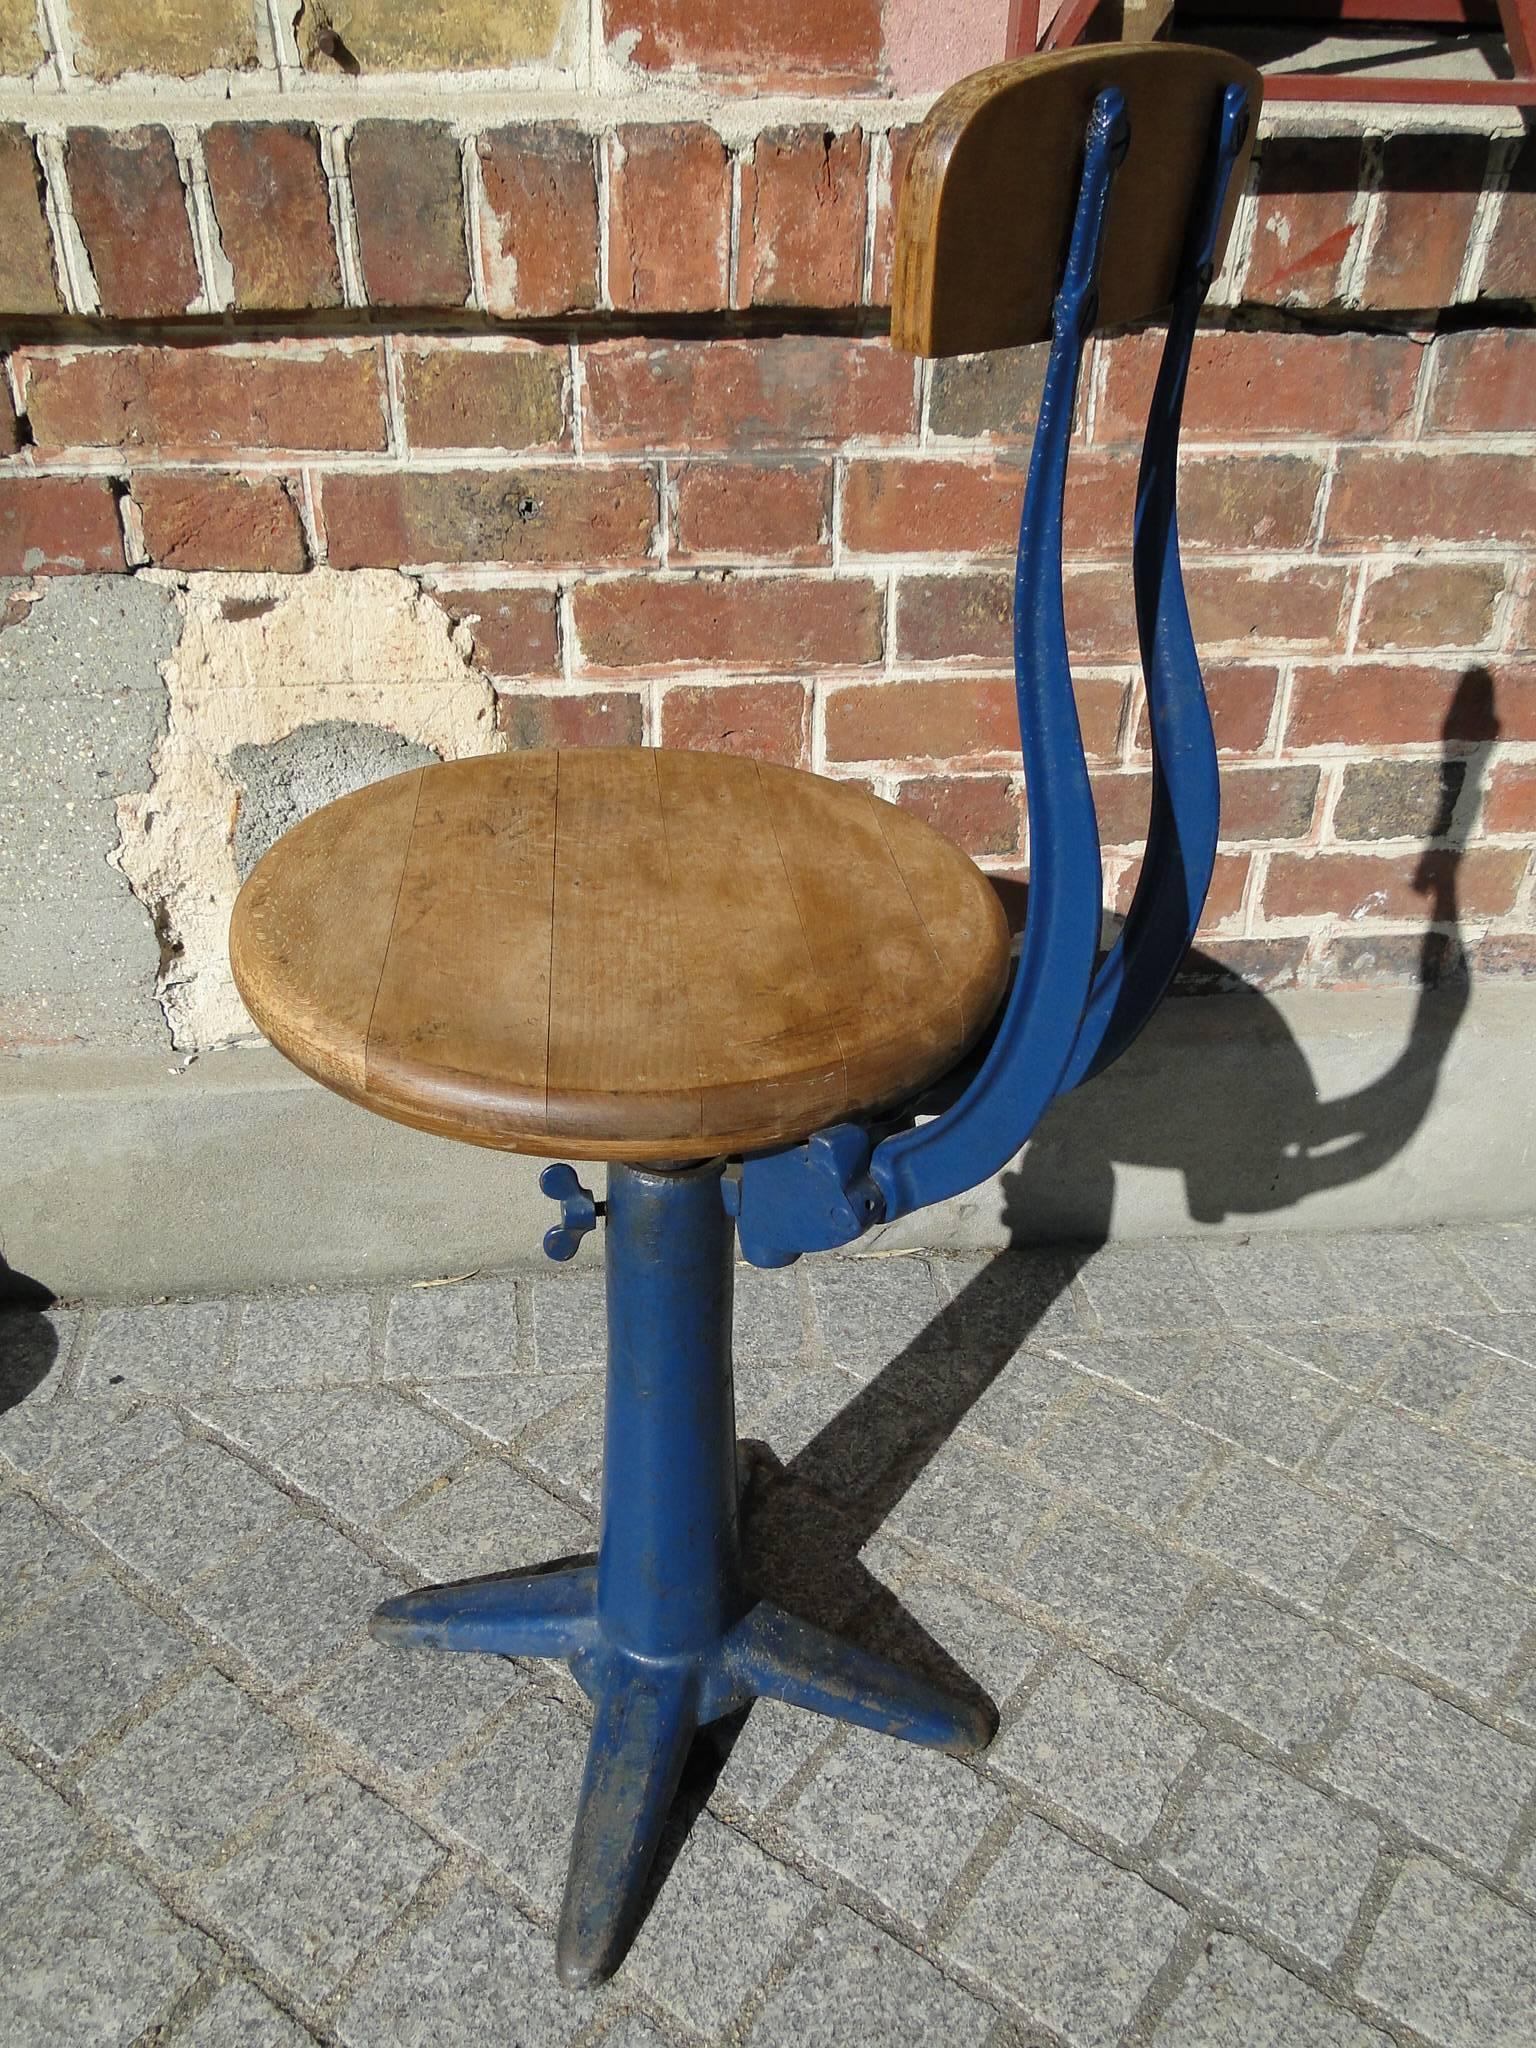 This 'Singer' machinist chair was manufactured by Simanco (Singer Manufacturing company), in the 1930s.

It is branded on the cast iron base which has been factory painted. The backrest are made from steam bent plywood. The chair are in excellent